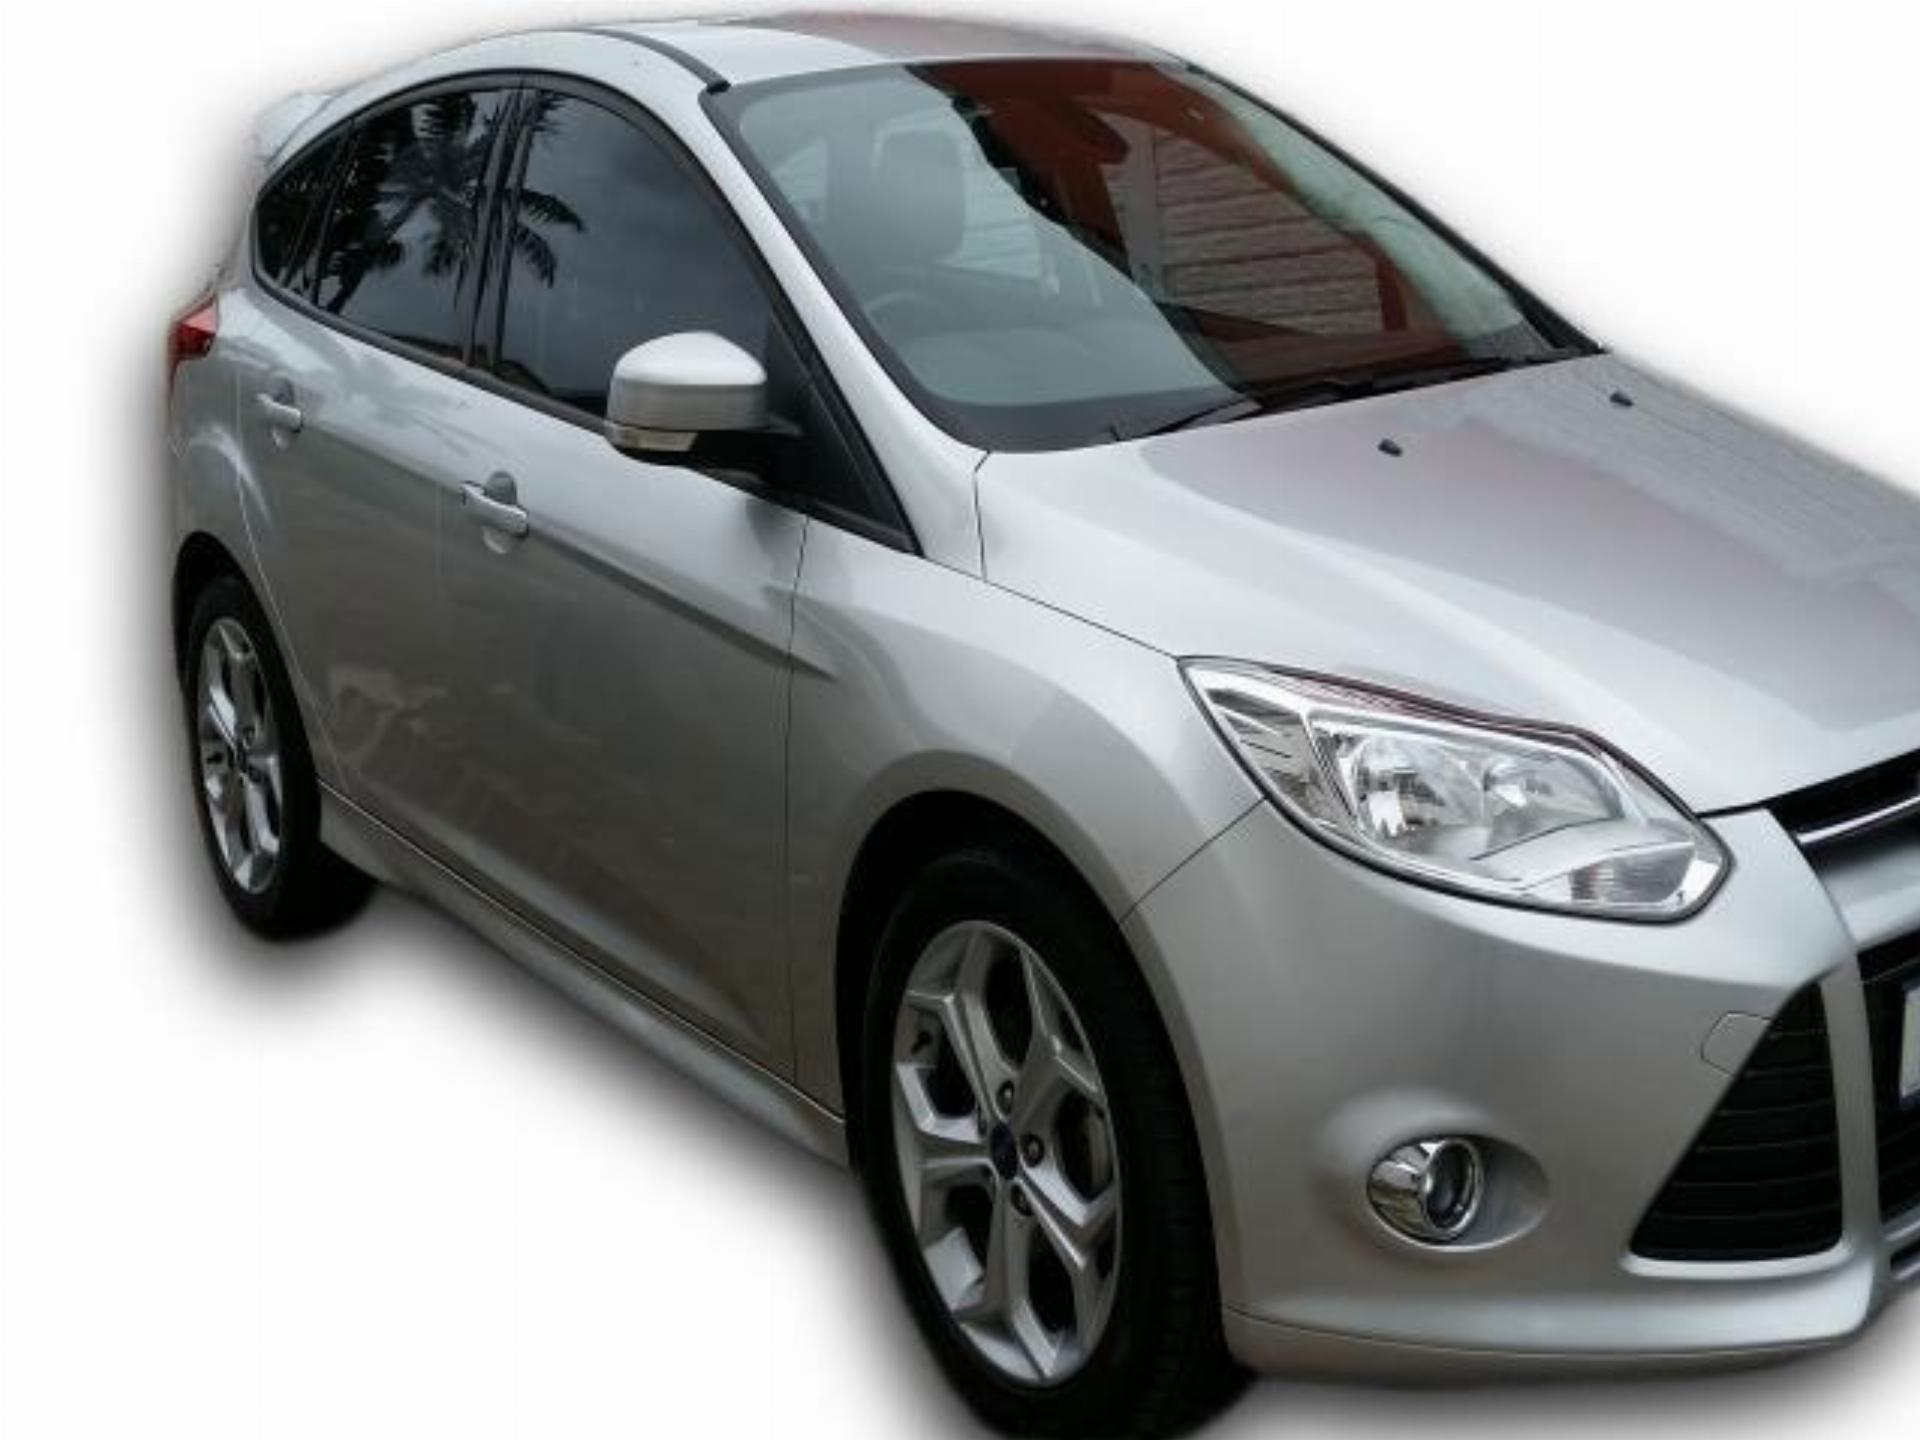 Ford Focus 1.6 TI VCT Trend 5DR